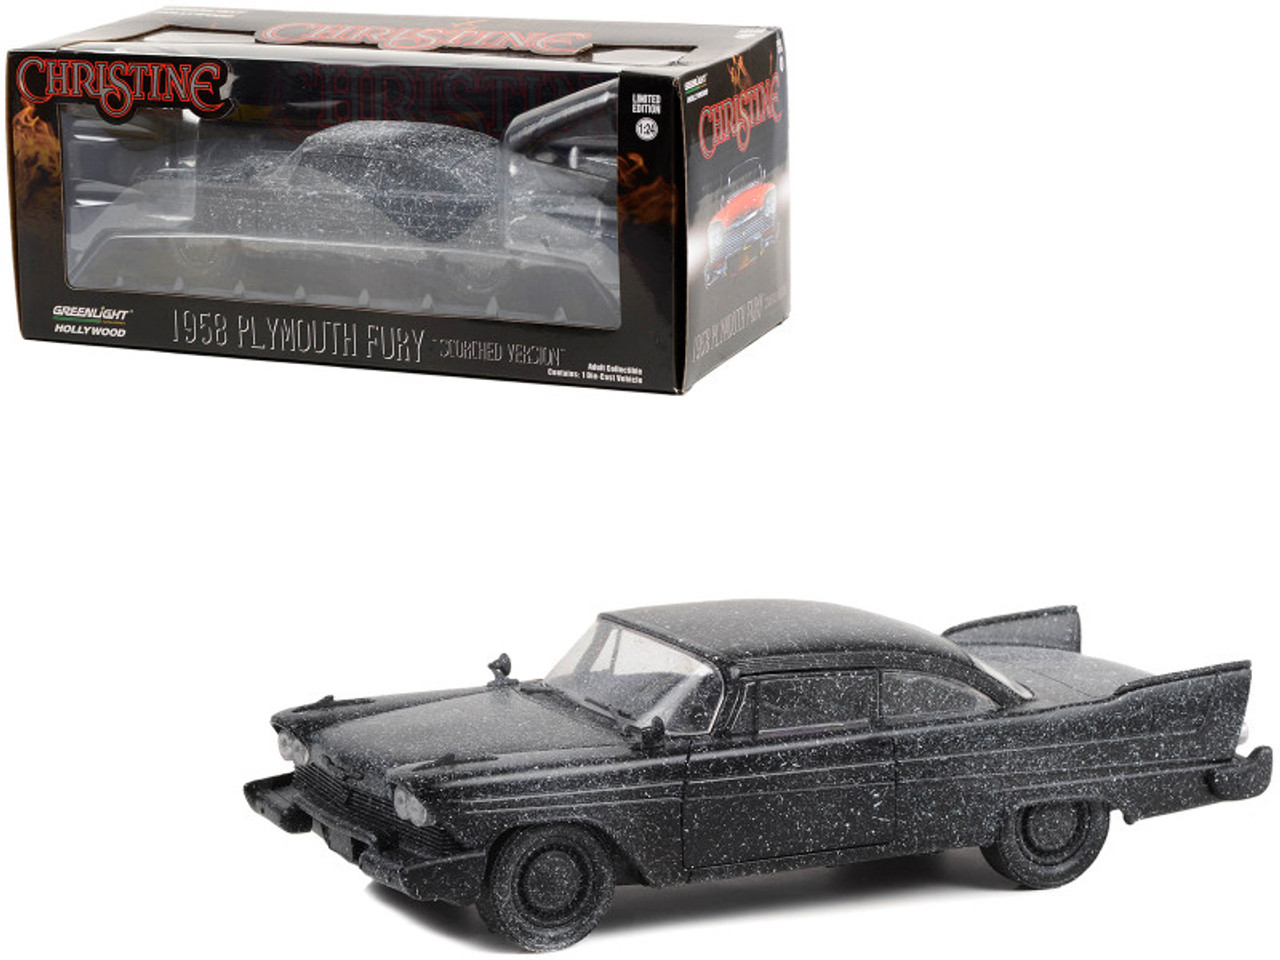 1958 Plymouth Fury (Scorched Version) Black with Ash "Christine" (1983) Movie 1/24 Diecast Model Car by Greenlight